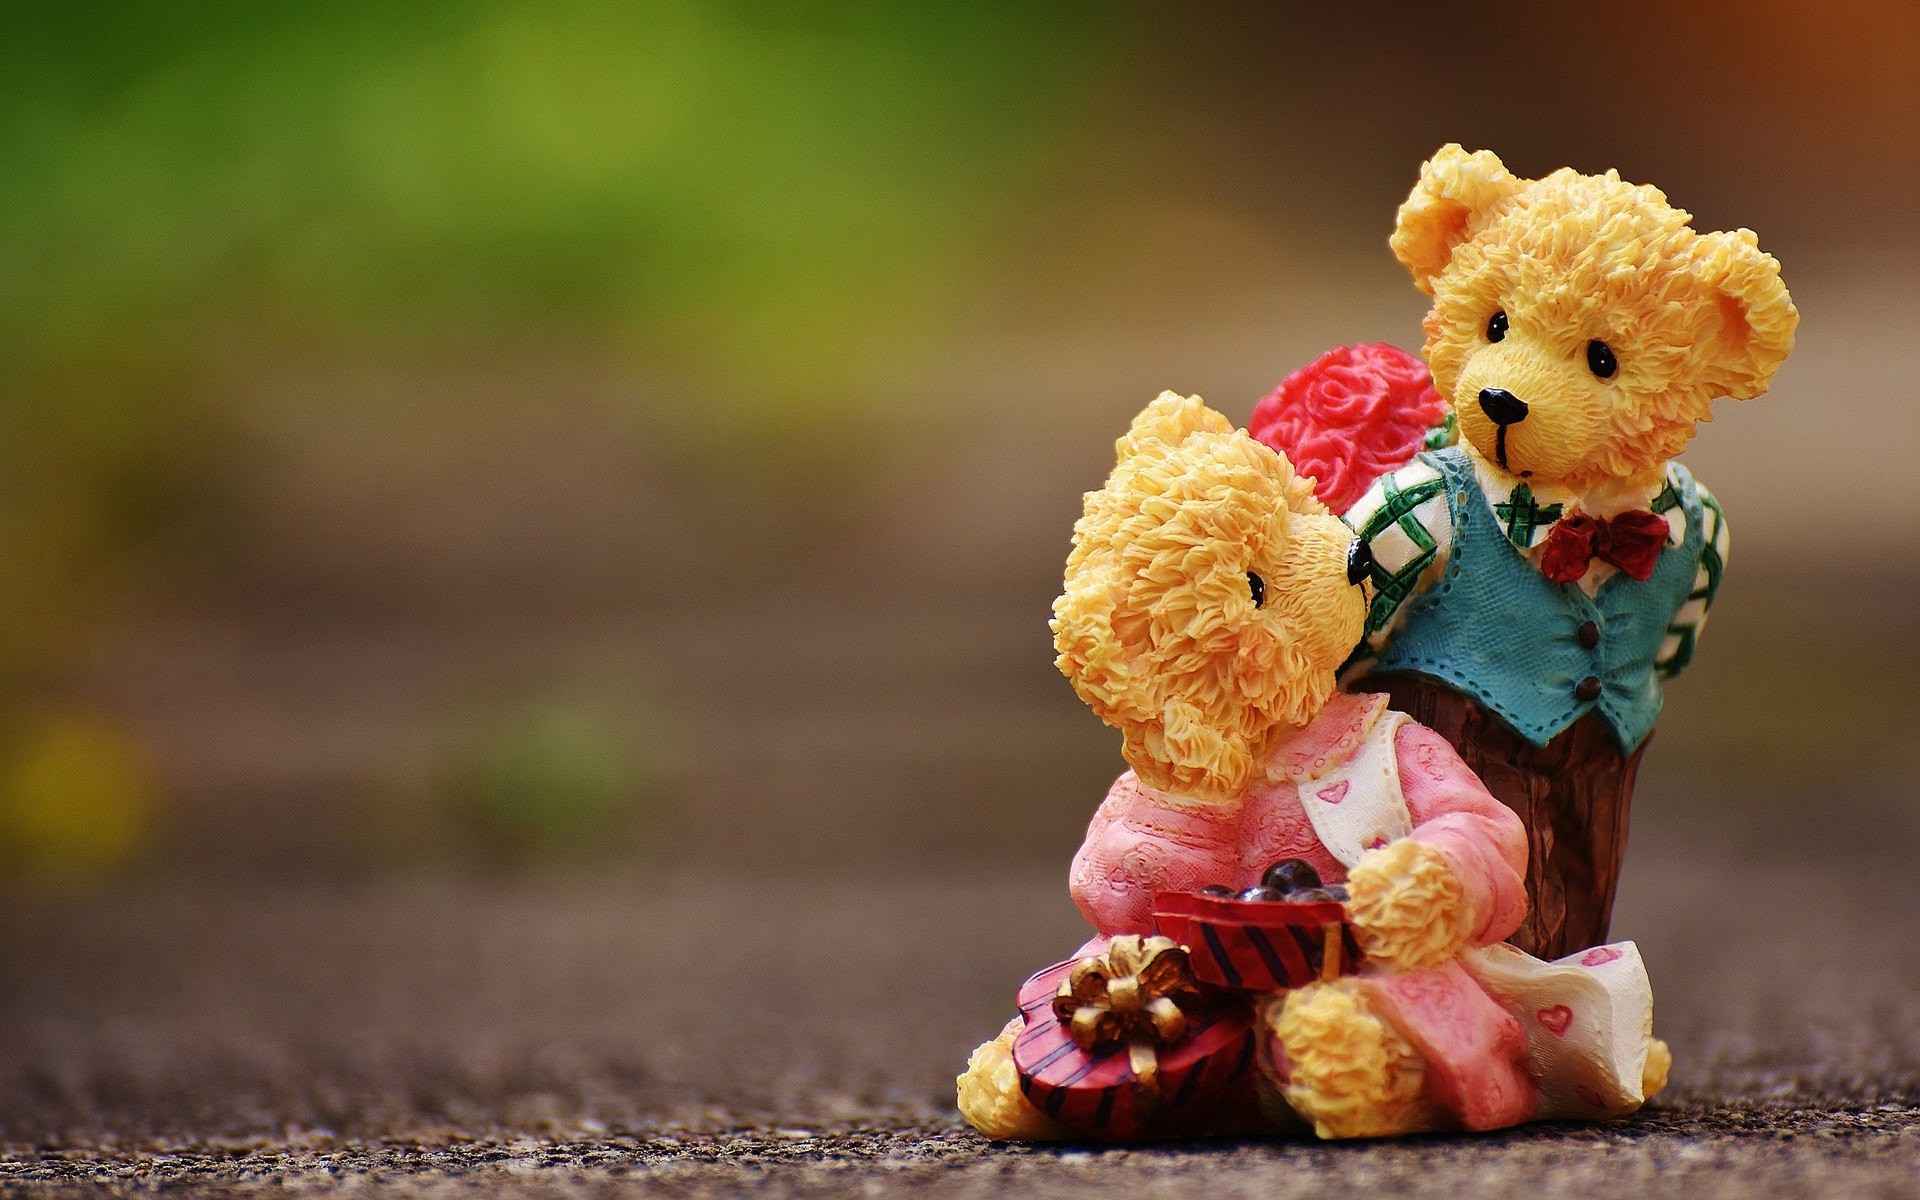 Teddy Bears On The Road Street Wallpapers 1920x1200